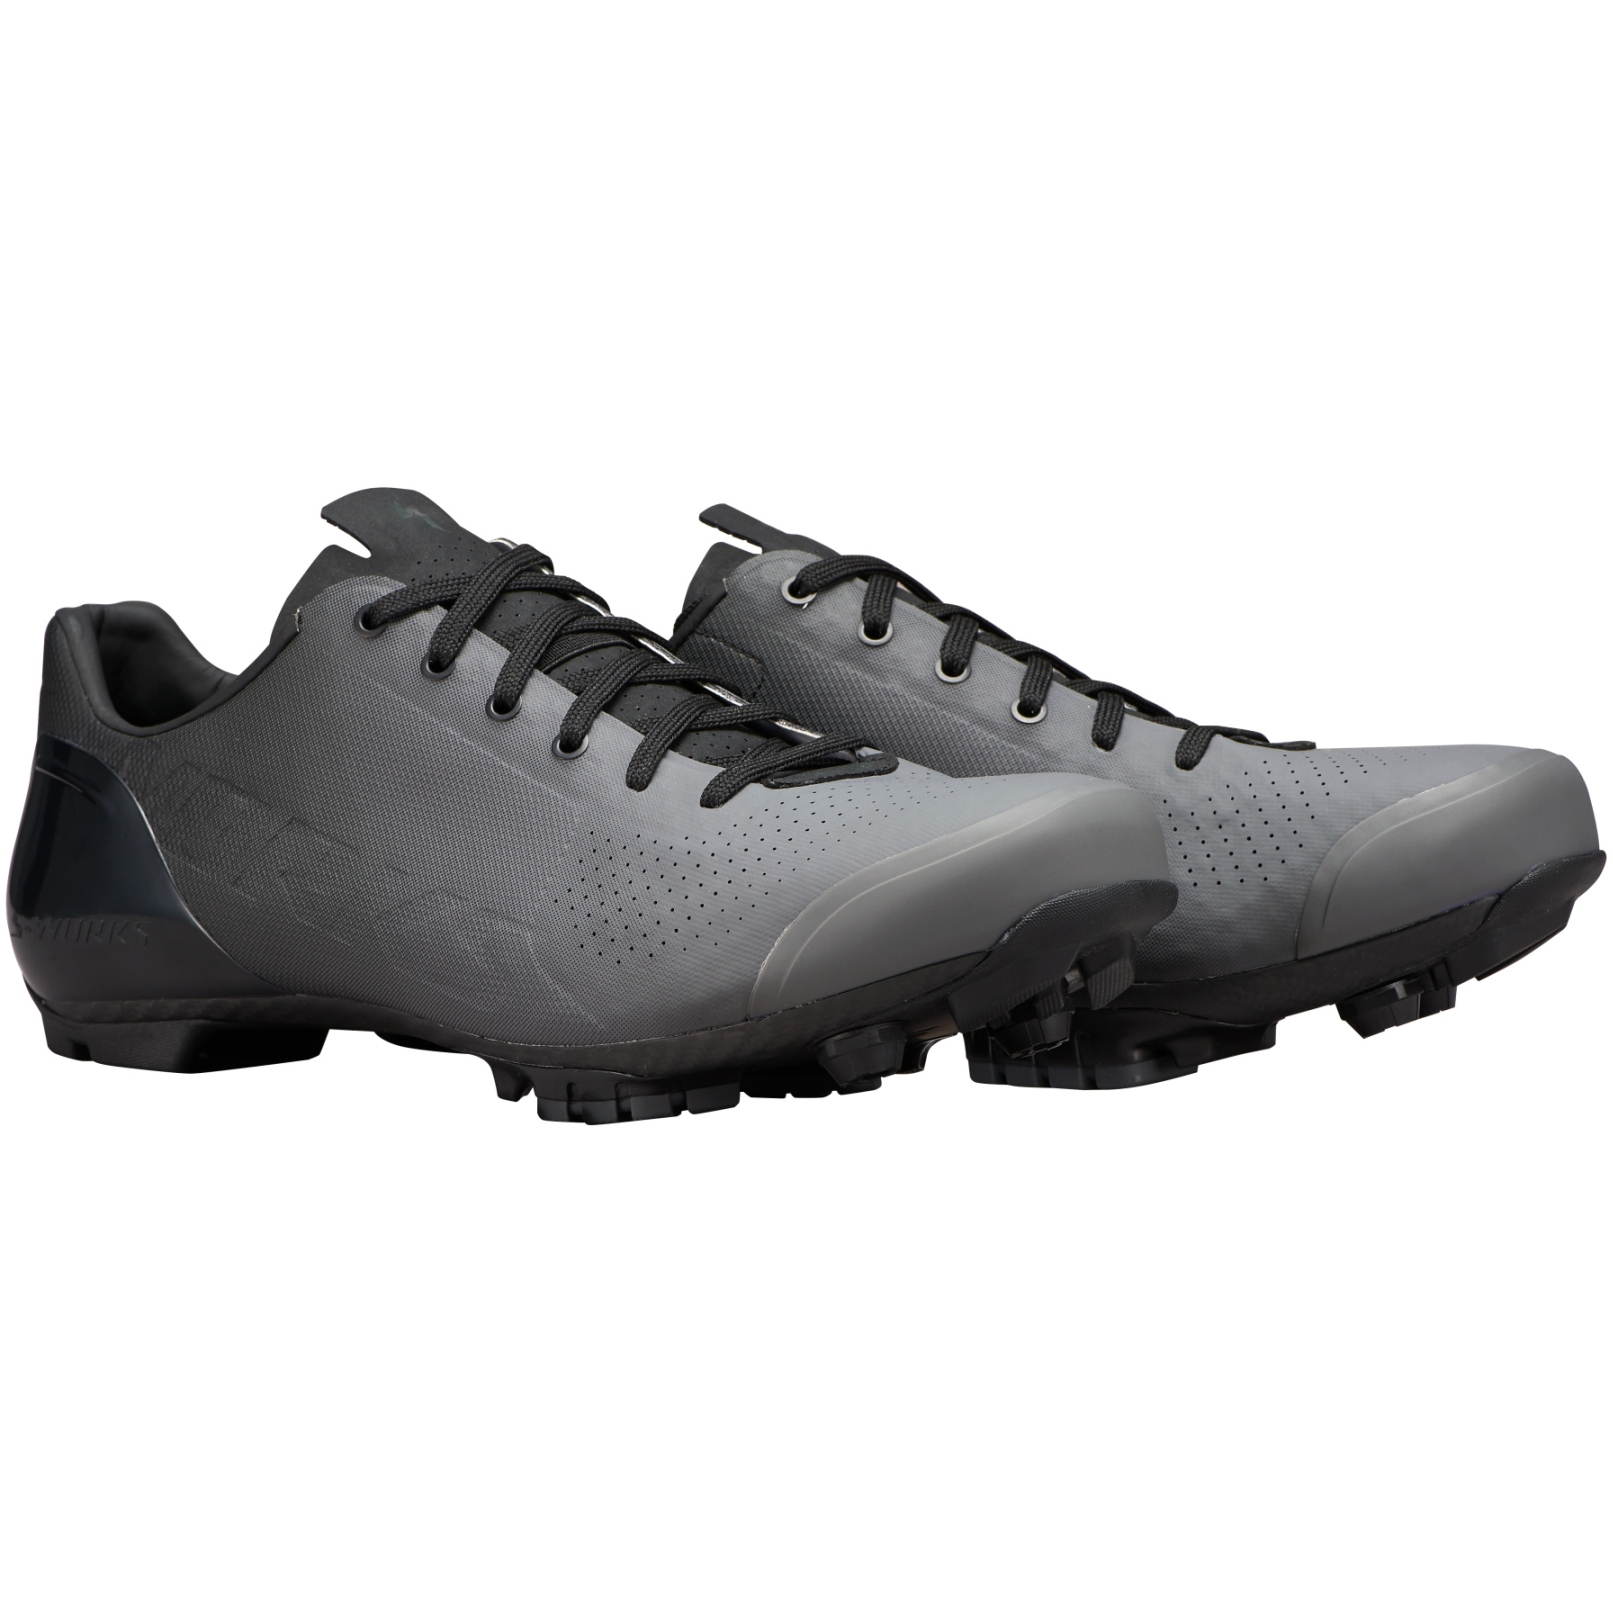 Image of Specialized S-Works Recon Lace Gravel Shoes - Black